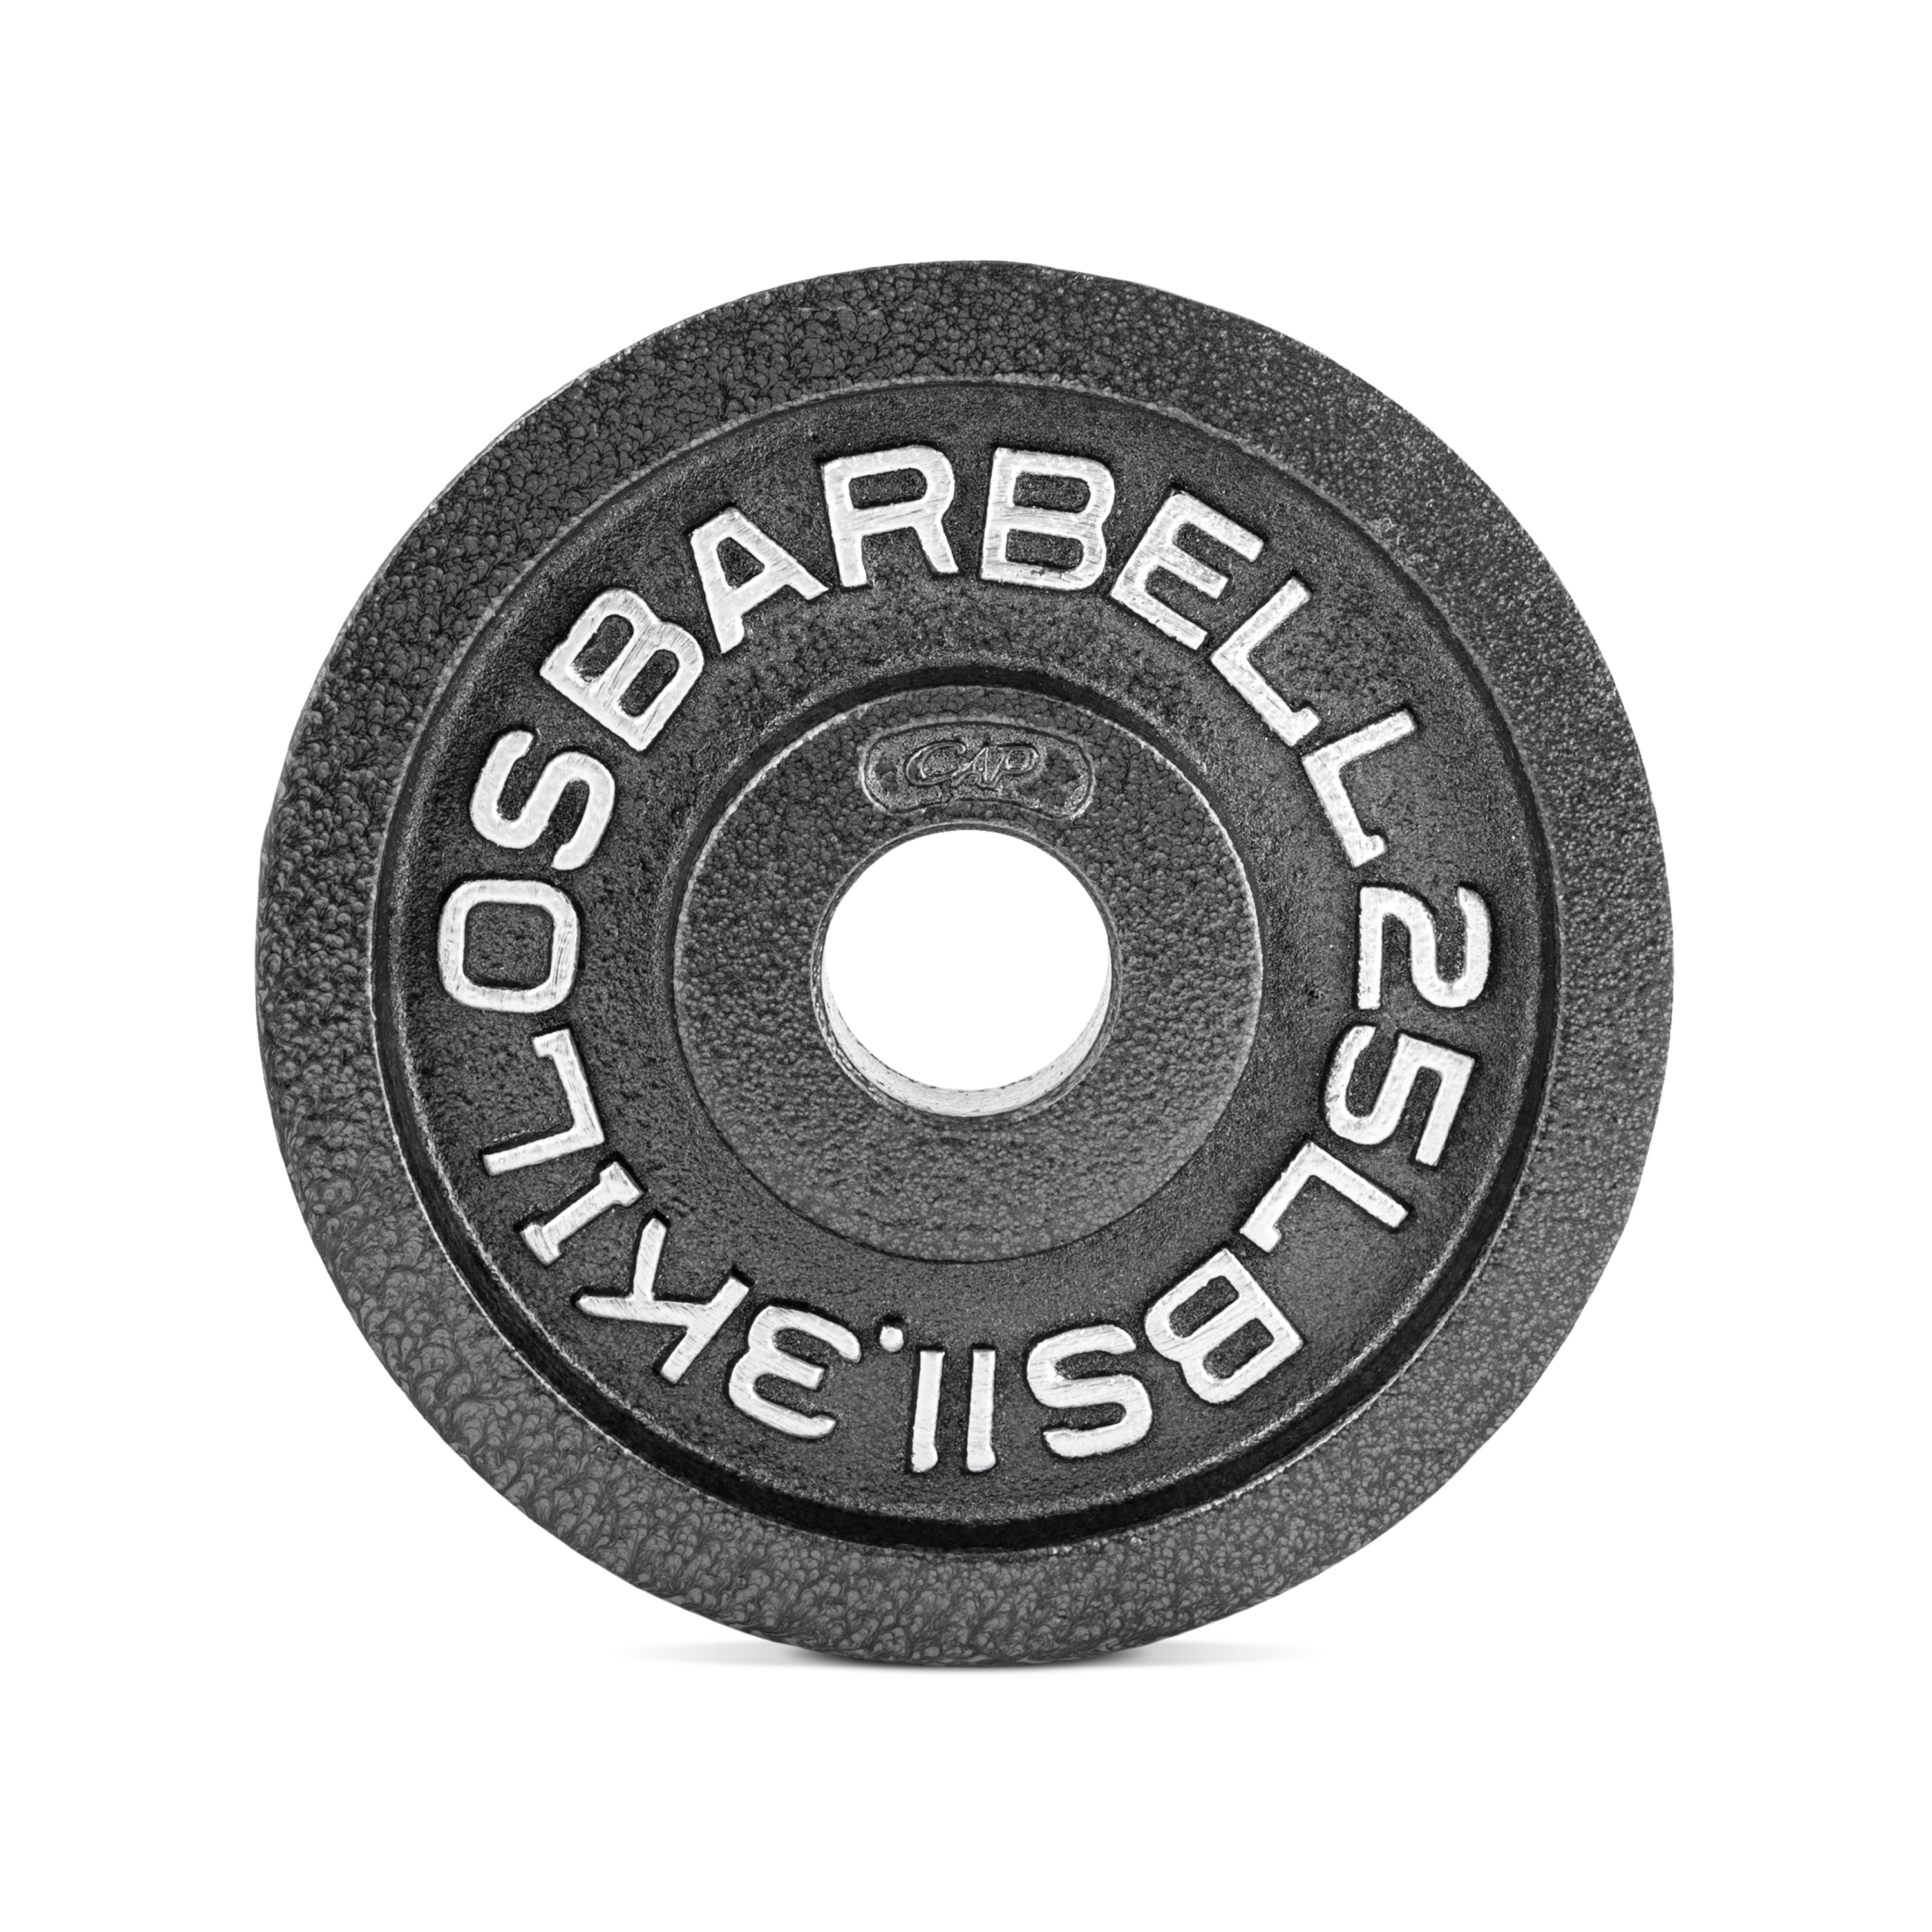 CAP Barbell - Olympic Cast Iron Plate, 25 Lbs. - image 1 of 4